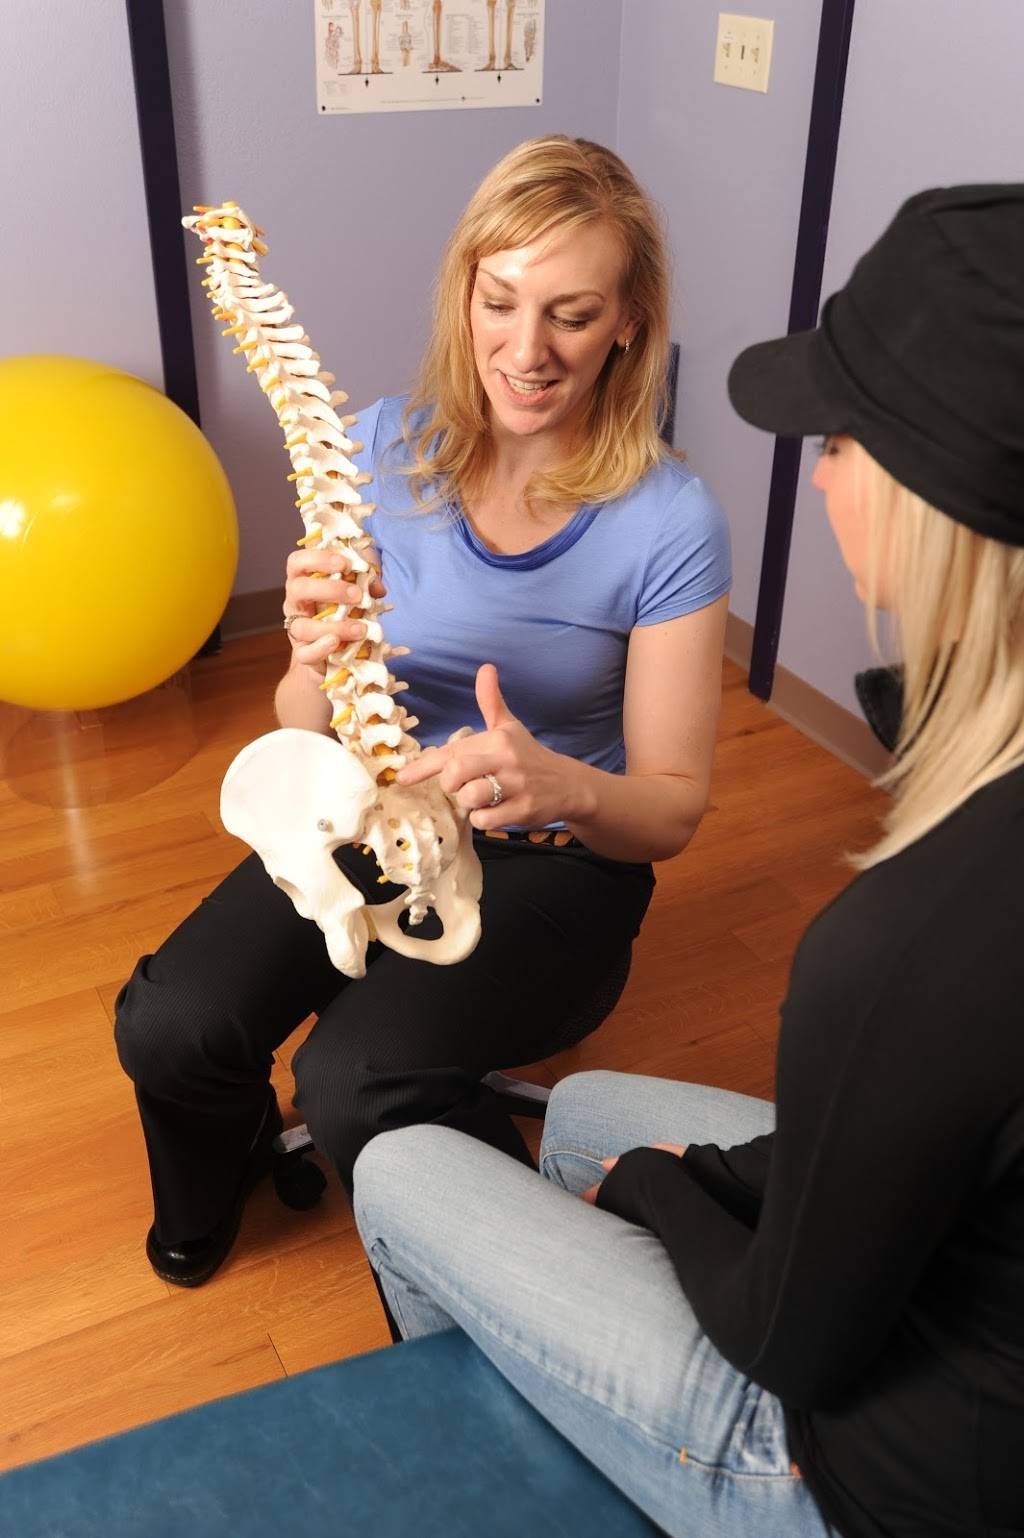 Back in Motion Chiropractic | 1400 E 4th Ave, Anchorage, AK 99501, USA | Phone: (907) 562-4567